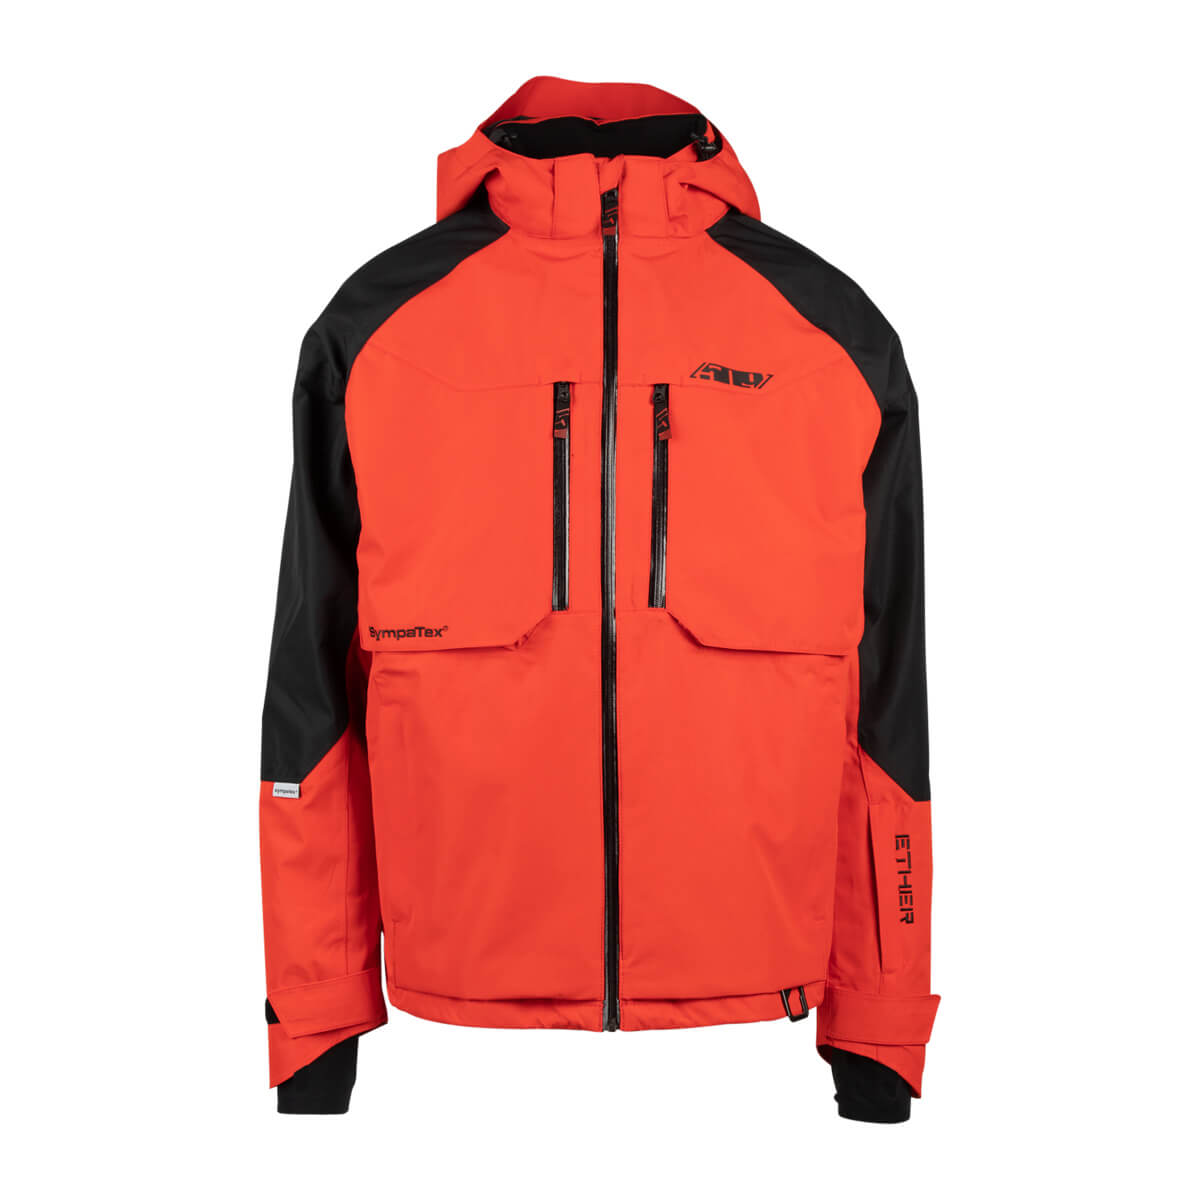 Ether Jacket Shell – 509